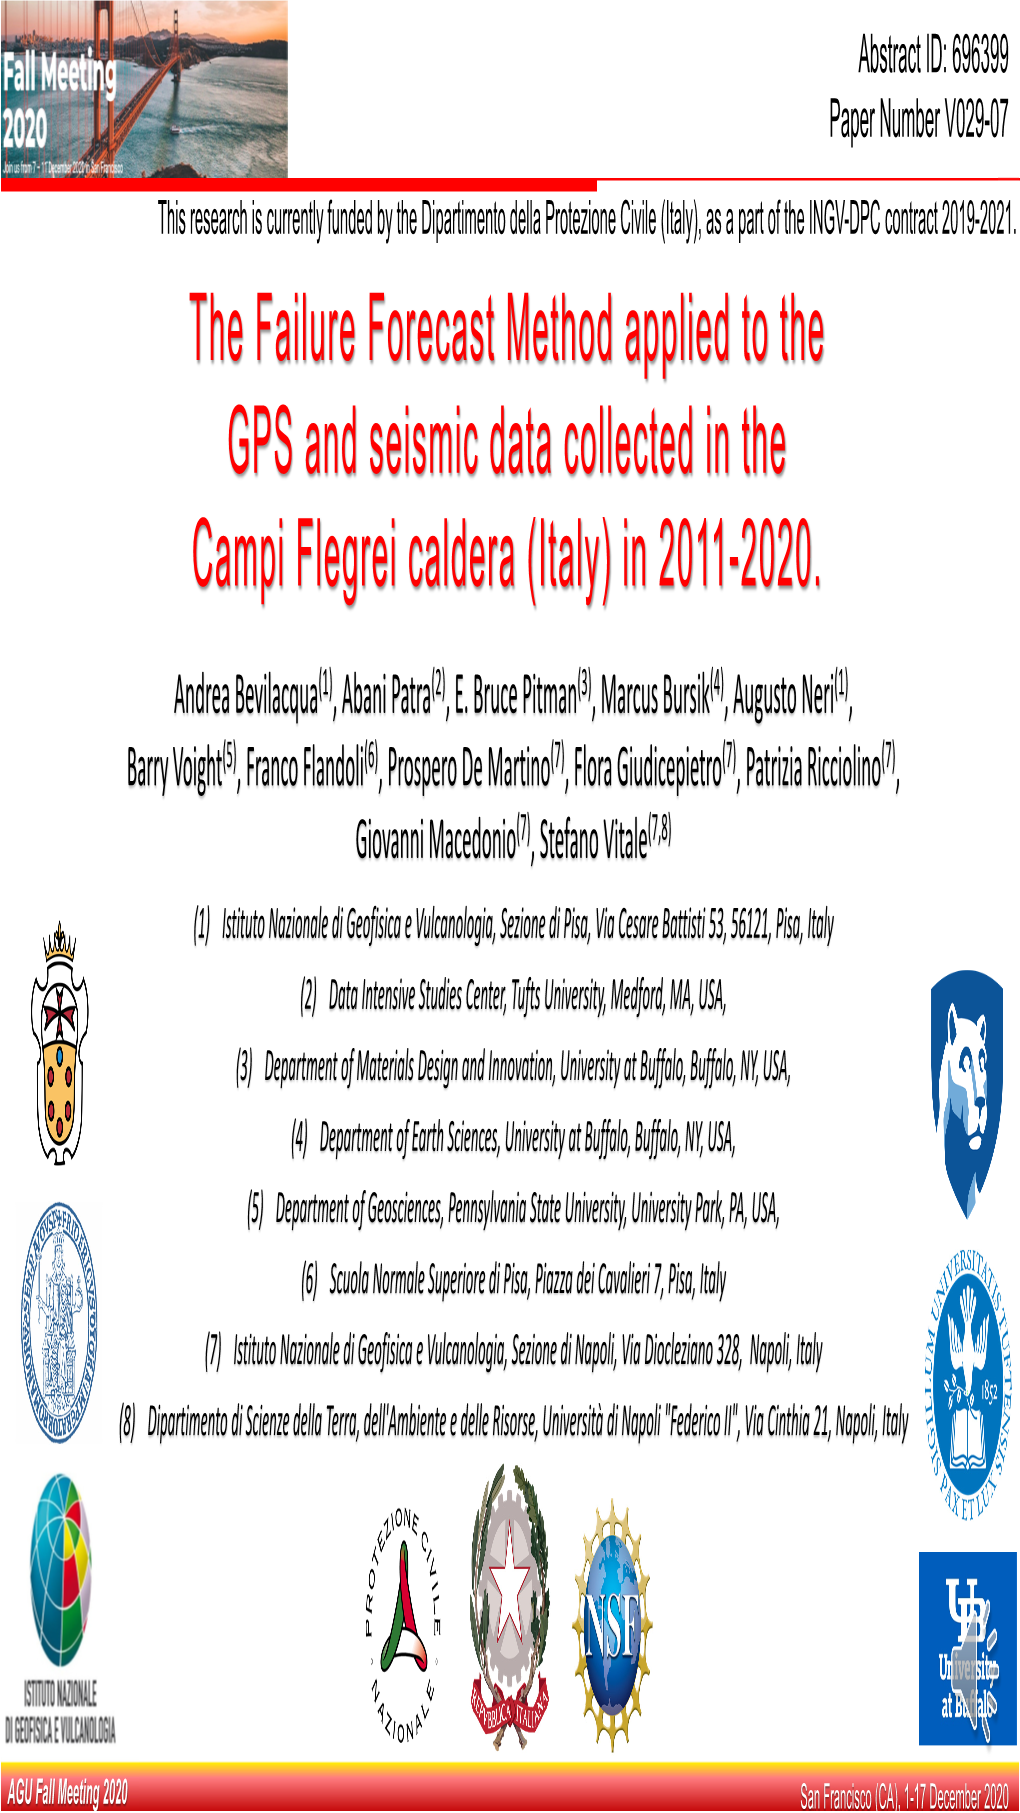 The Failure Forecast Method Applied to the GPS and Seismic Data Collected in the Campi Flegrei Caldera (Italy) in 2011-2020